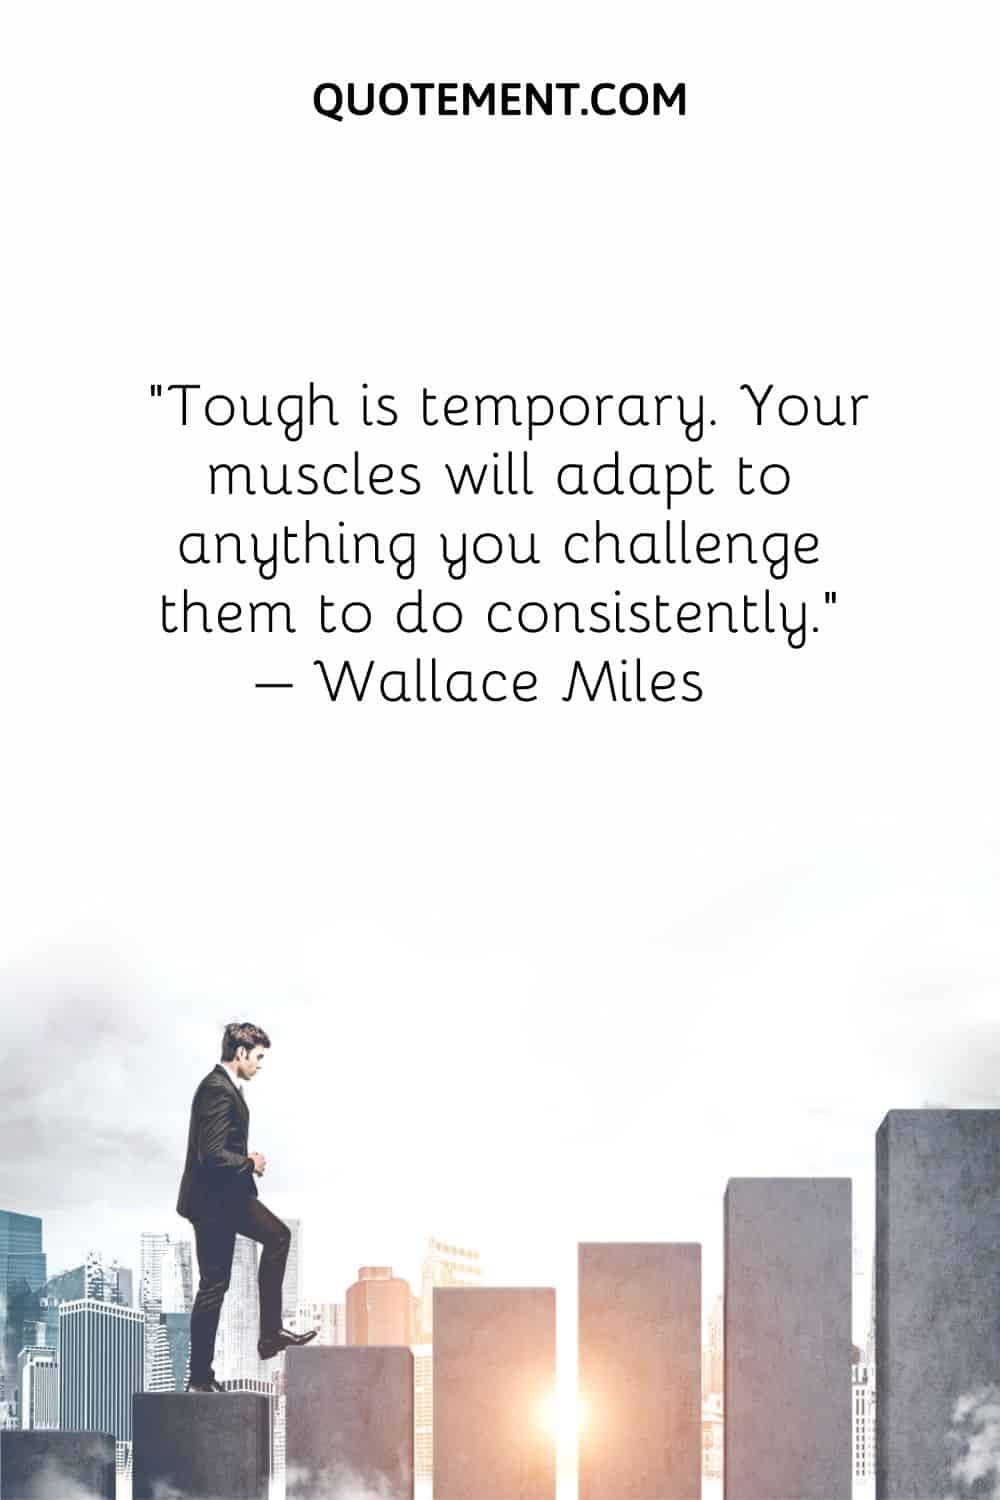 Tough is temporary. Your muscles will adapt to anything you challenge them to do consistently